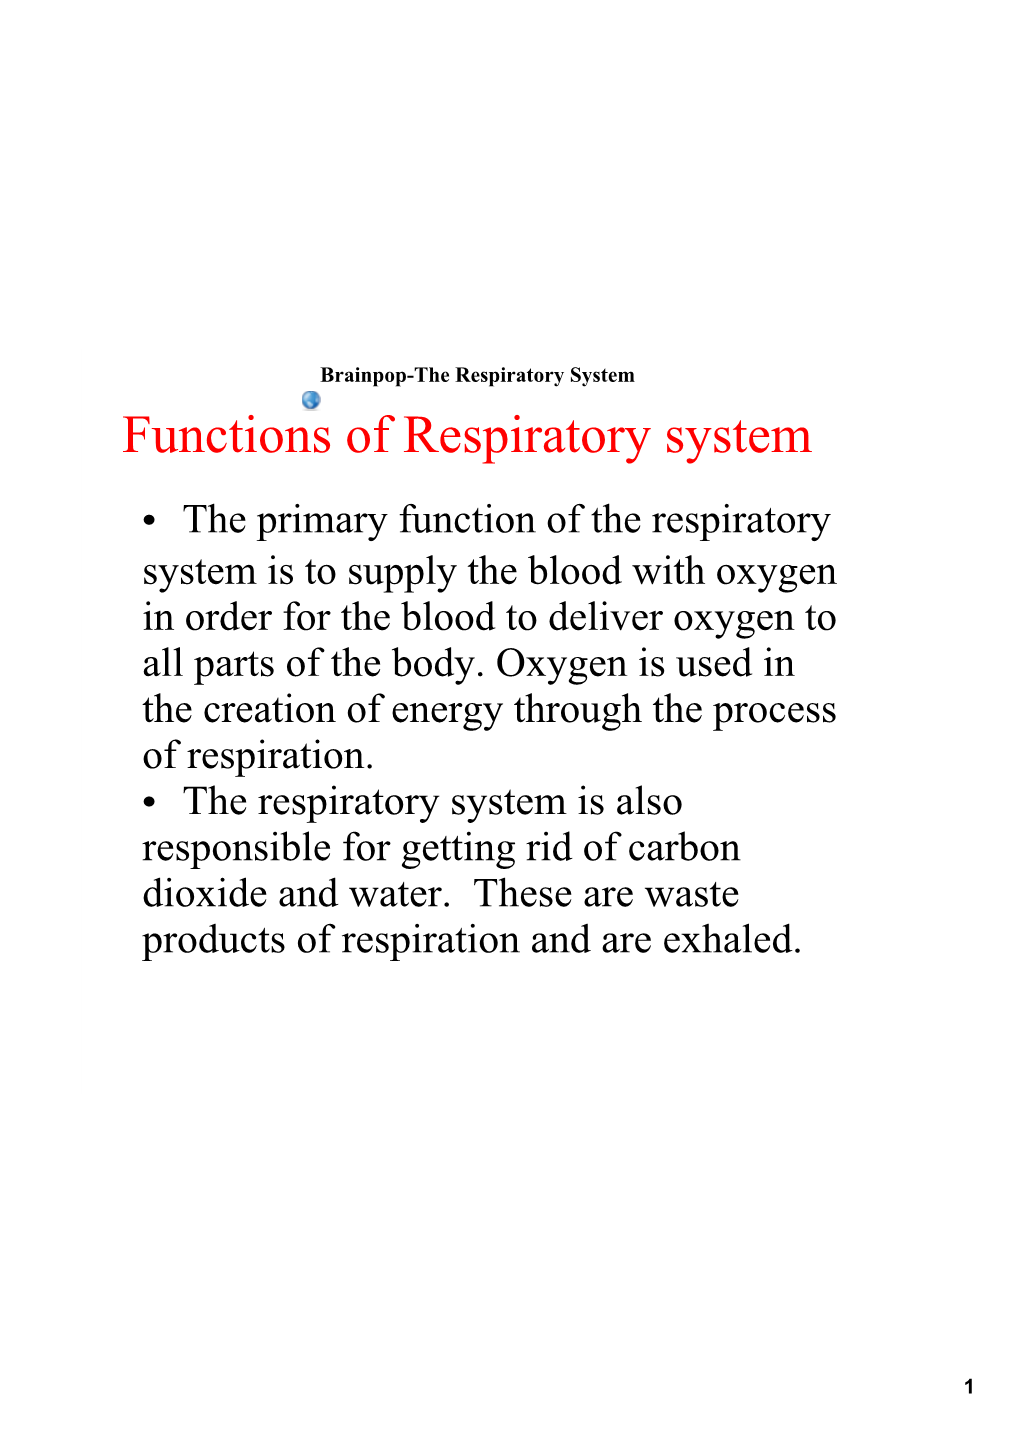 Functions of Respiratory System